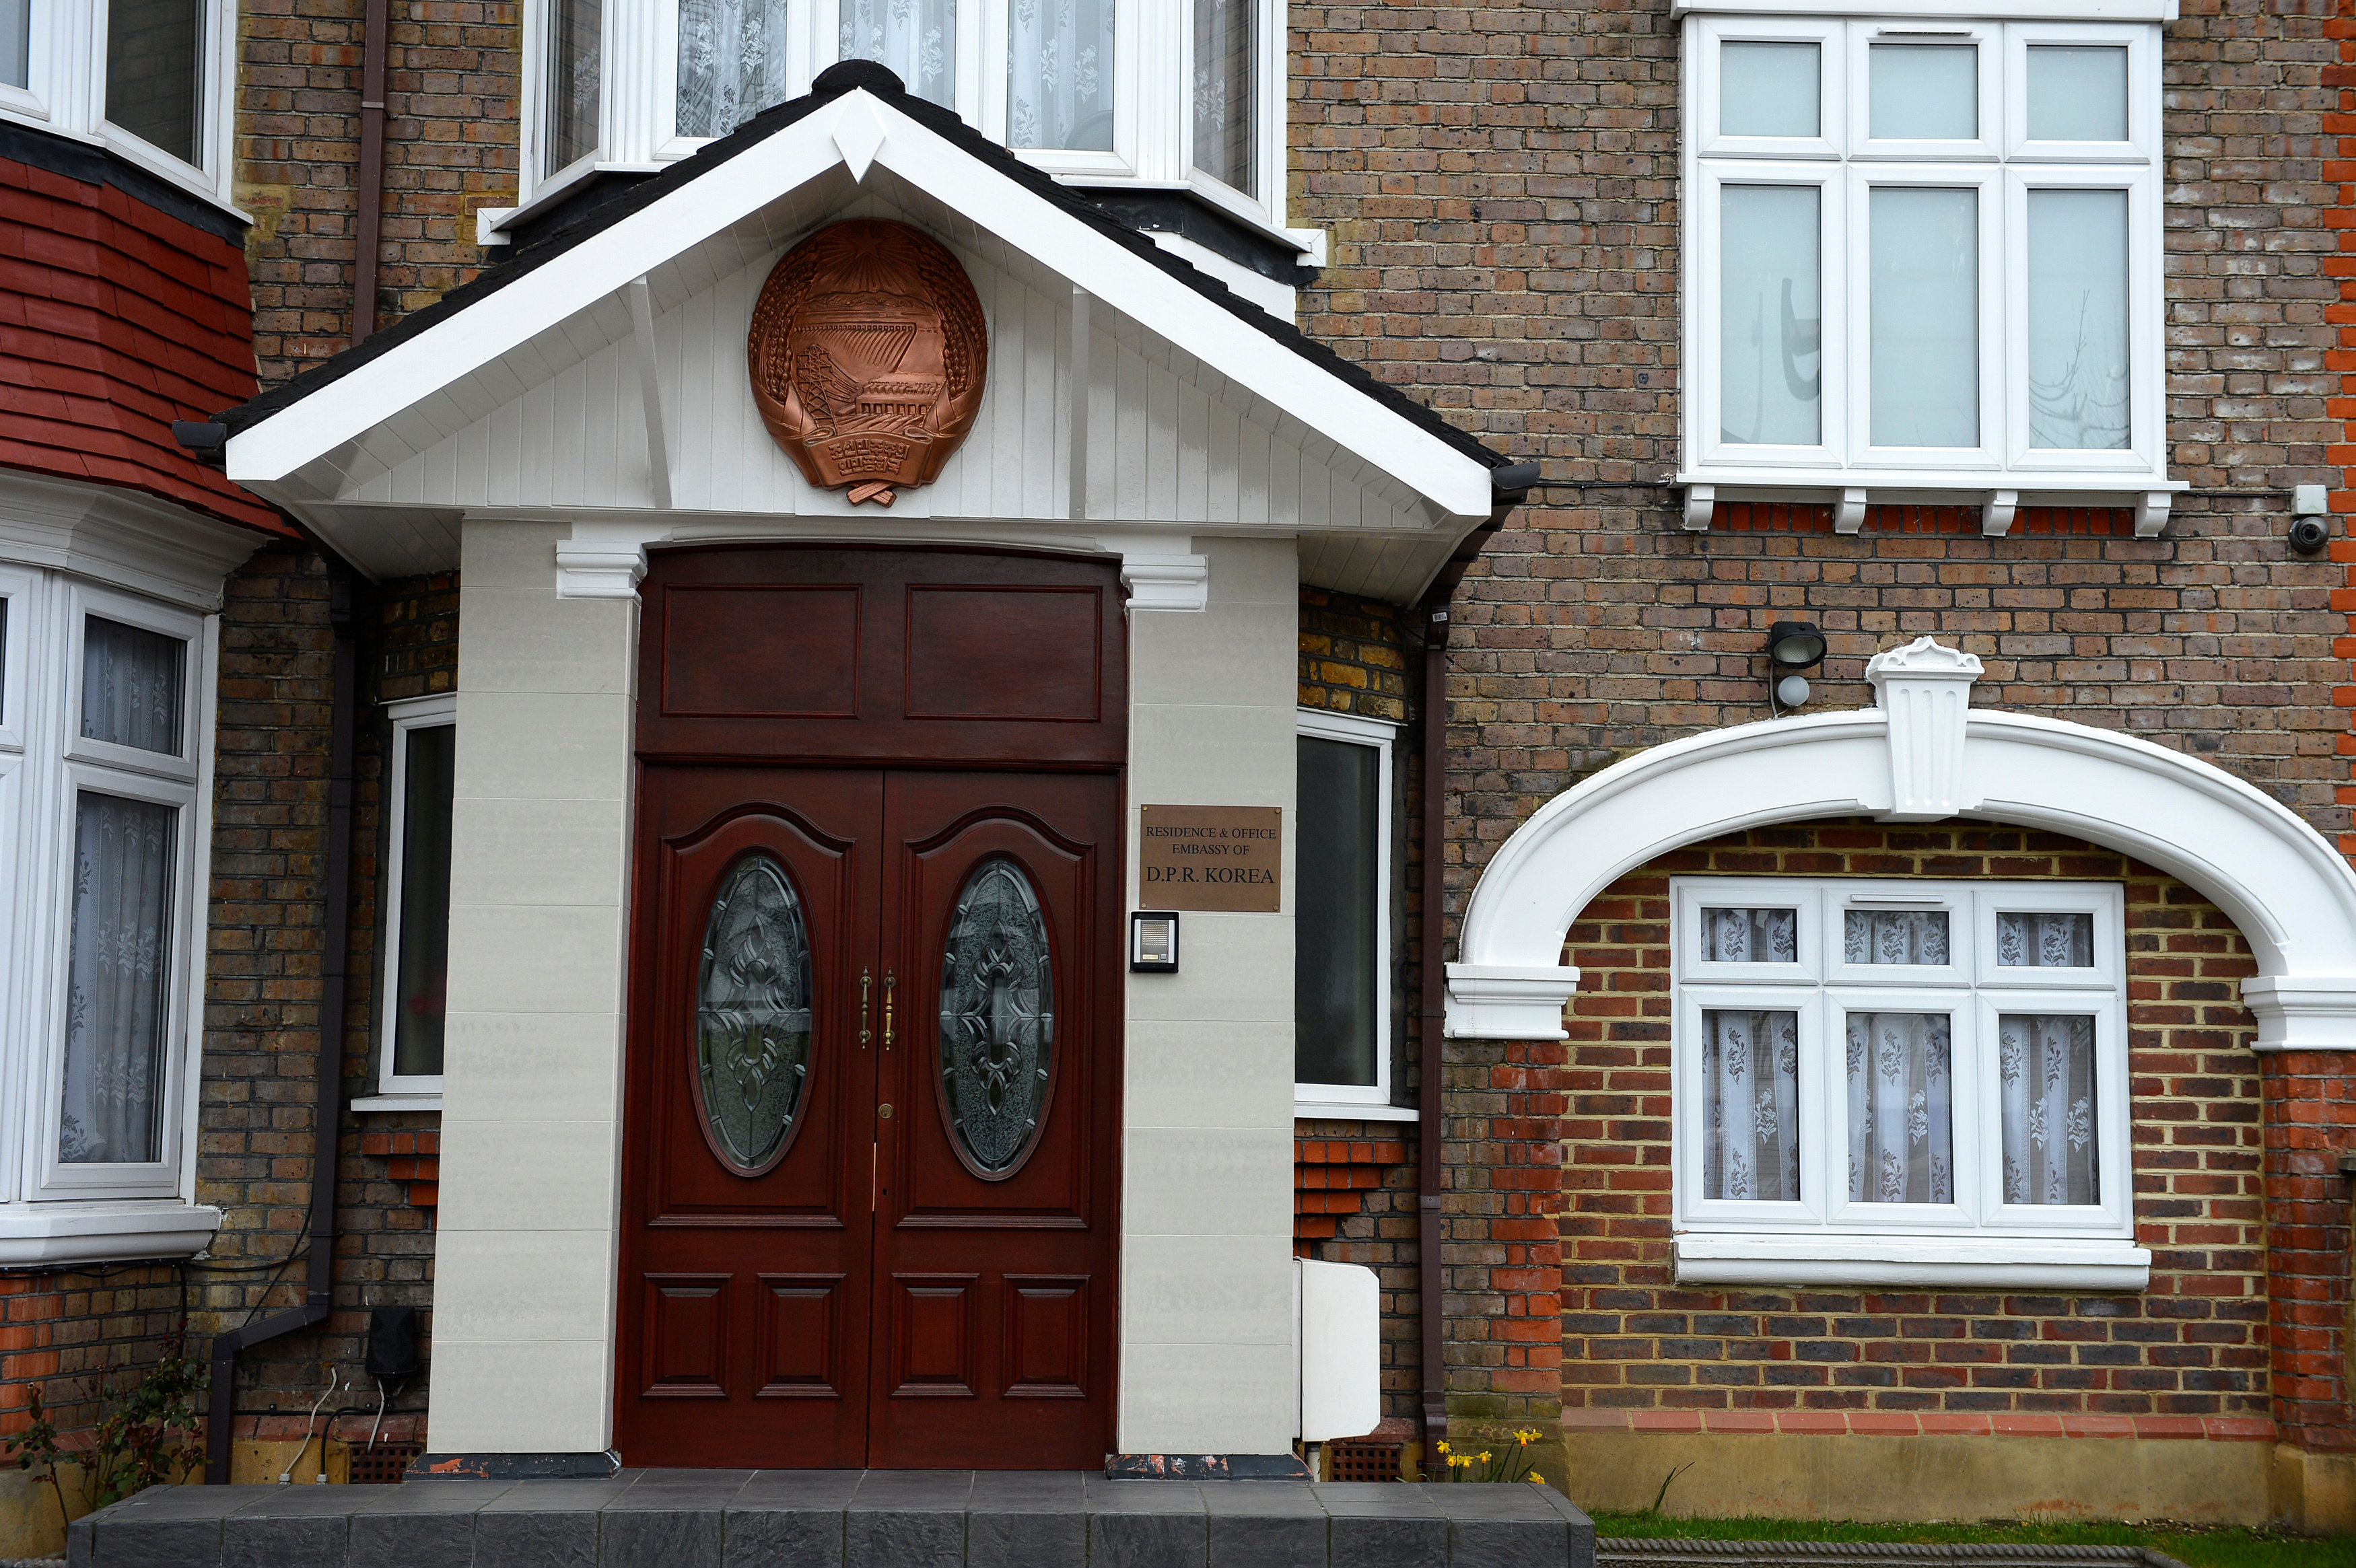 North Korea's embassy to the United Kingdom is seen located in a house in a residential district in west London, Britain March 30, 2013. REUTERS/Paul Hackett/File Photon